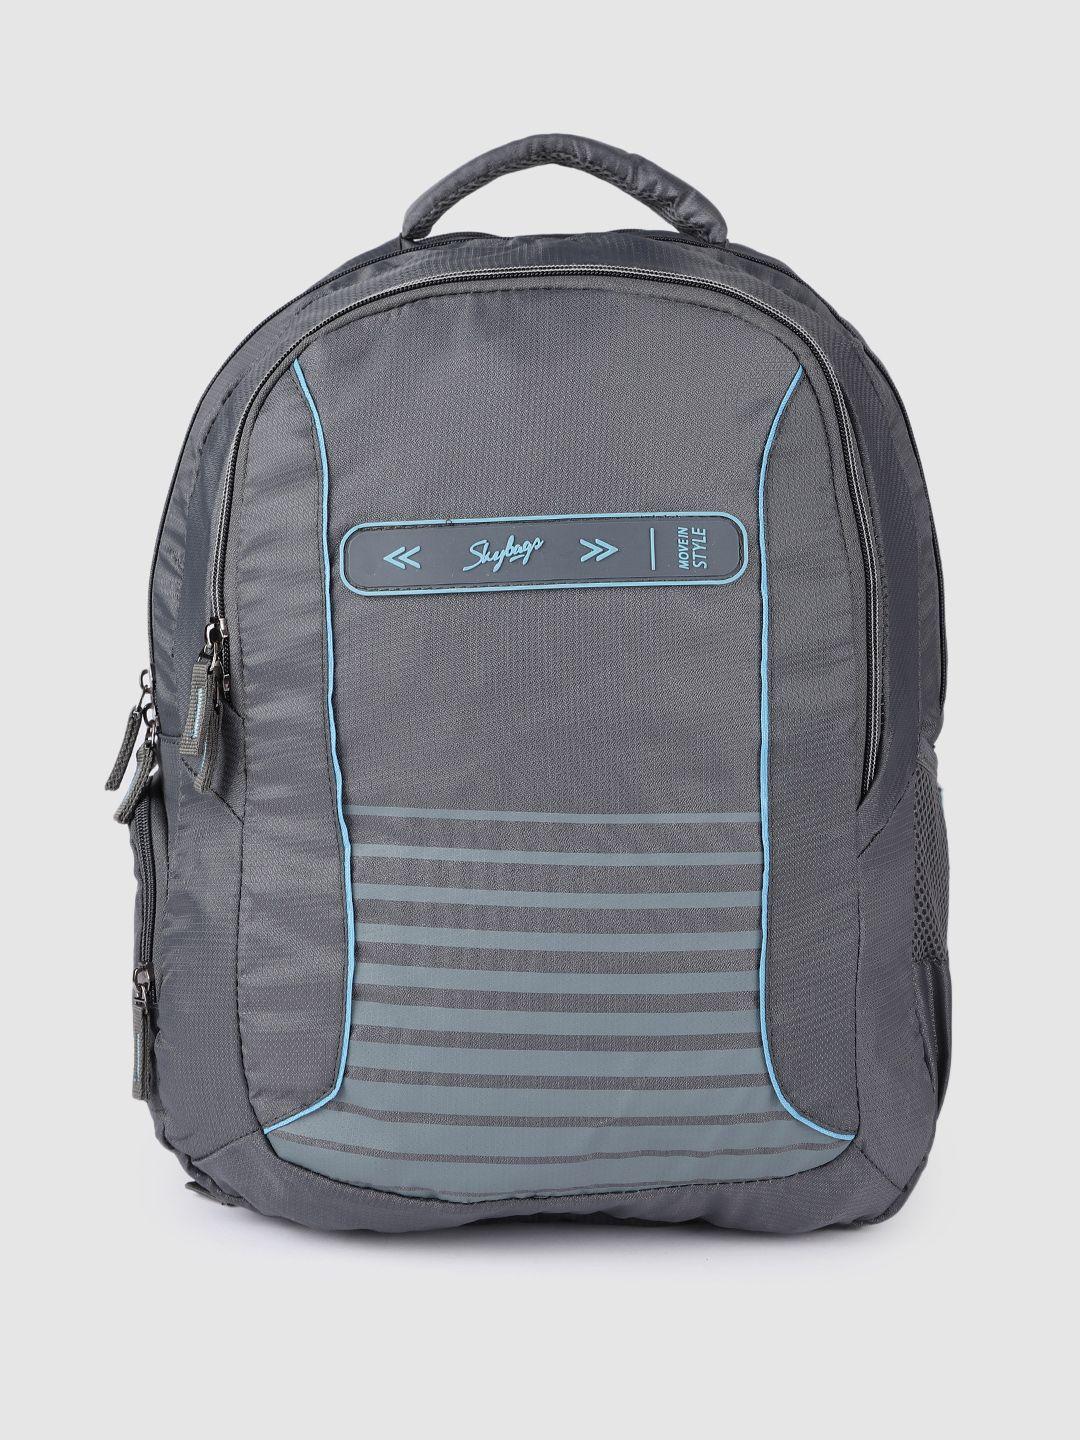 skybags unisex grey striped backpack with rain cover